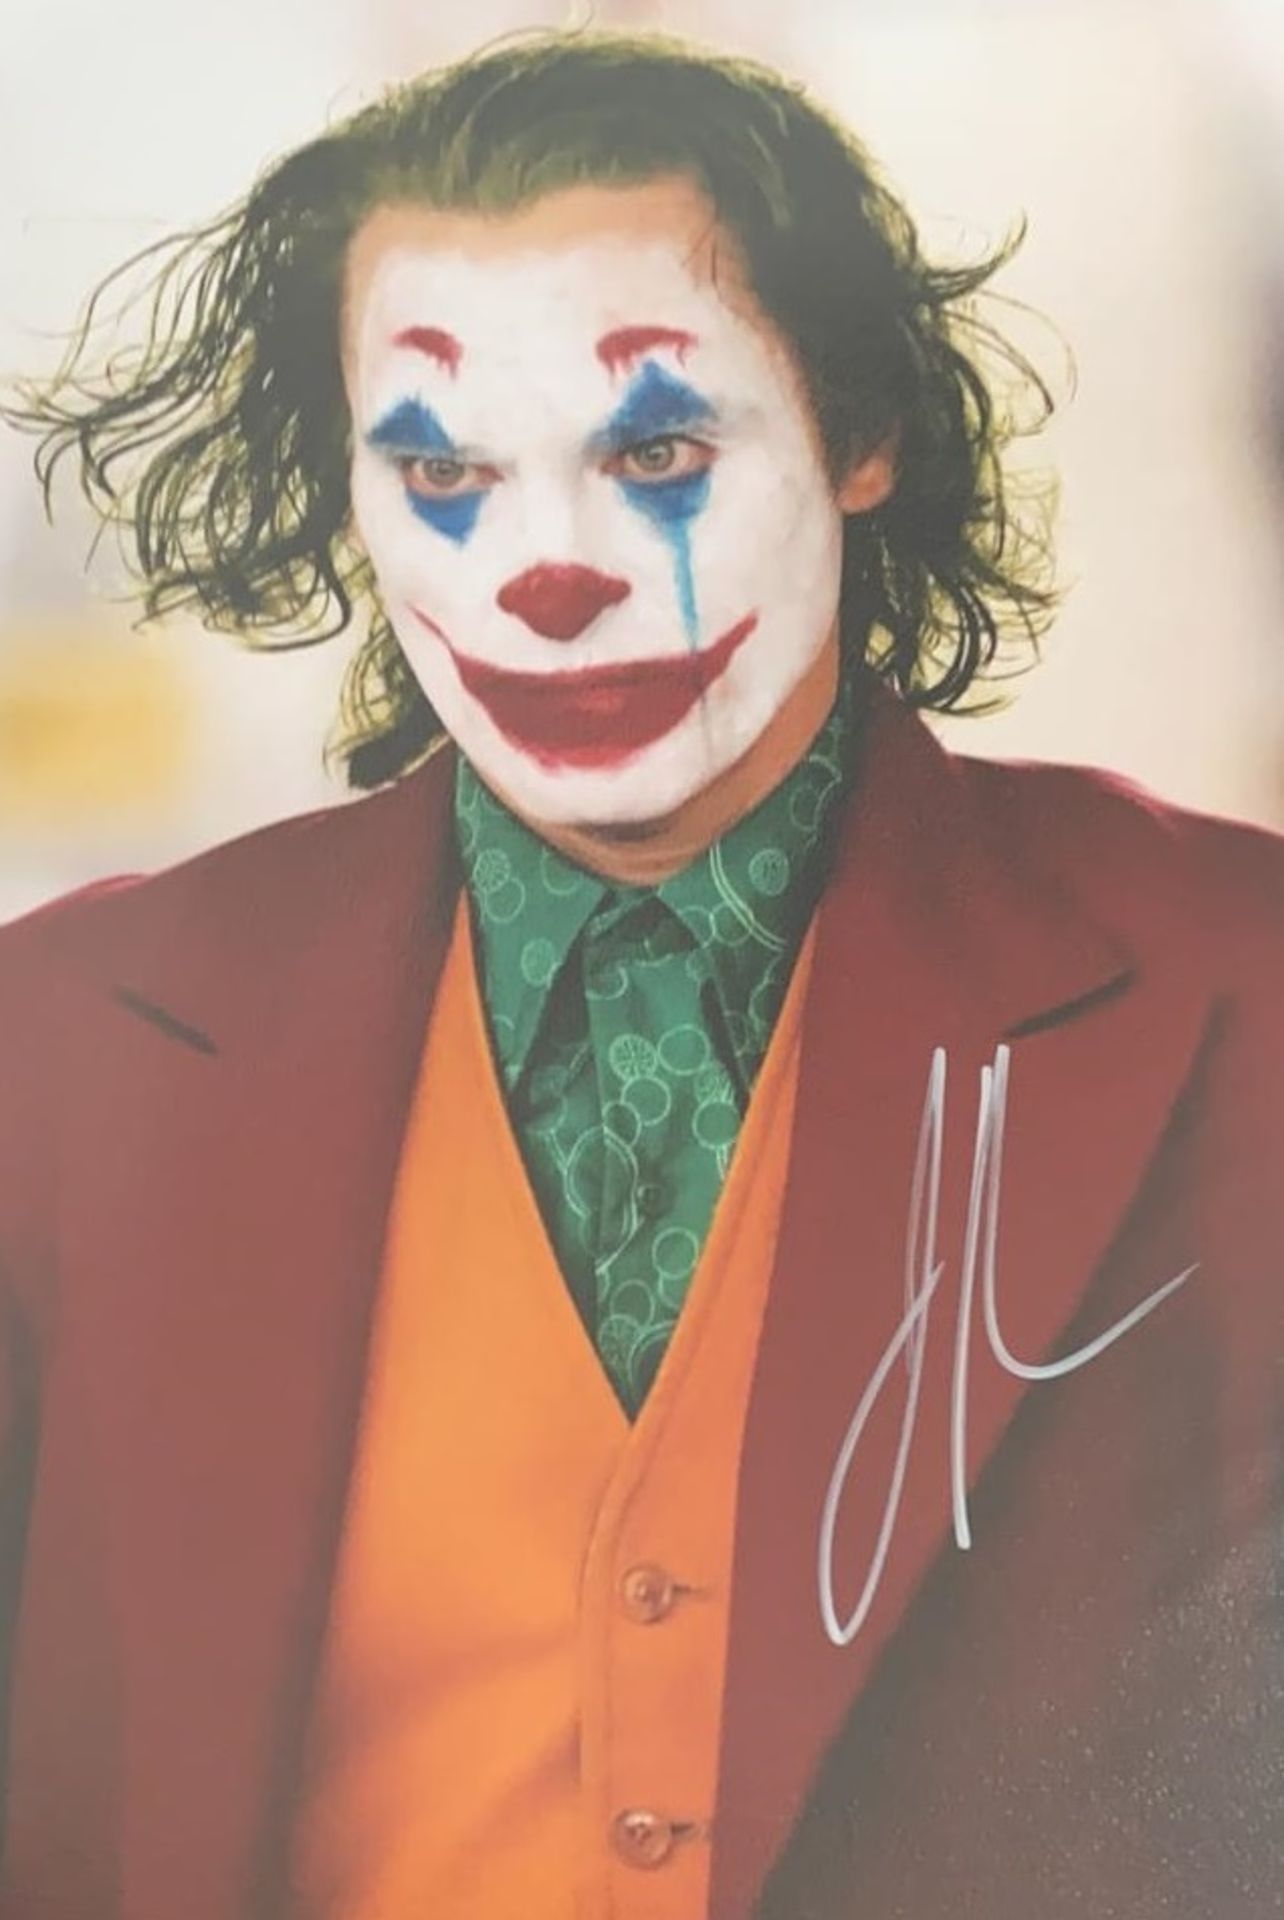 1 x Signed Autograph Picture - JOAQUIN PHOENIX THE JOKER - With COA - Size 12 x 8 Inch - CL590 -